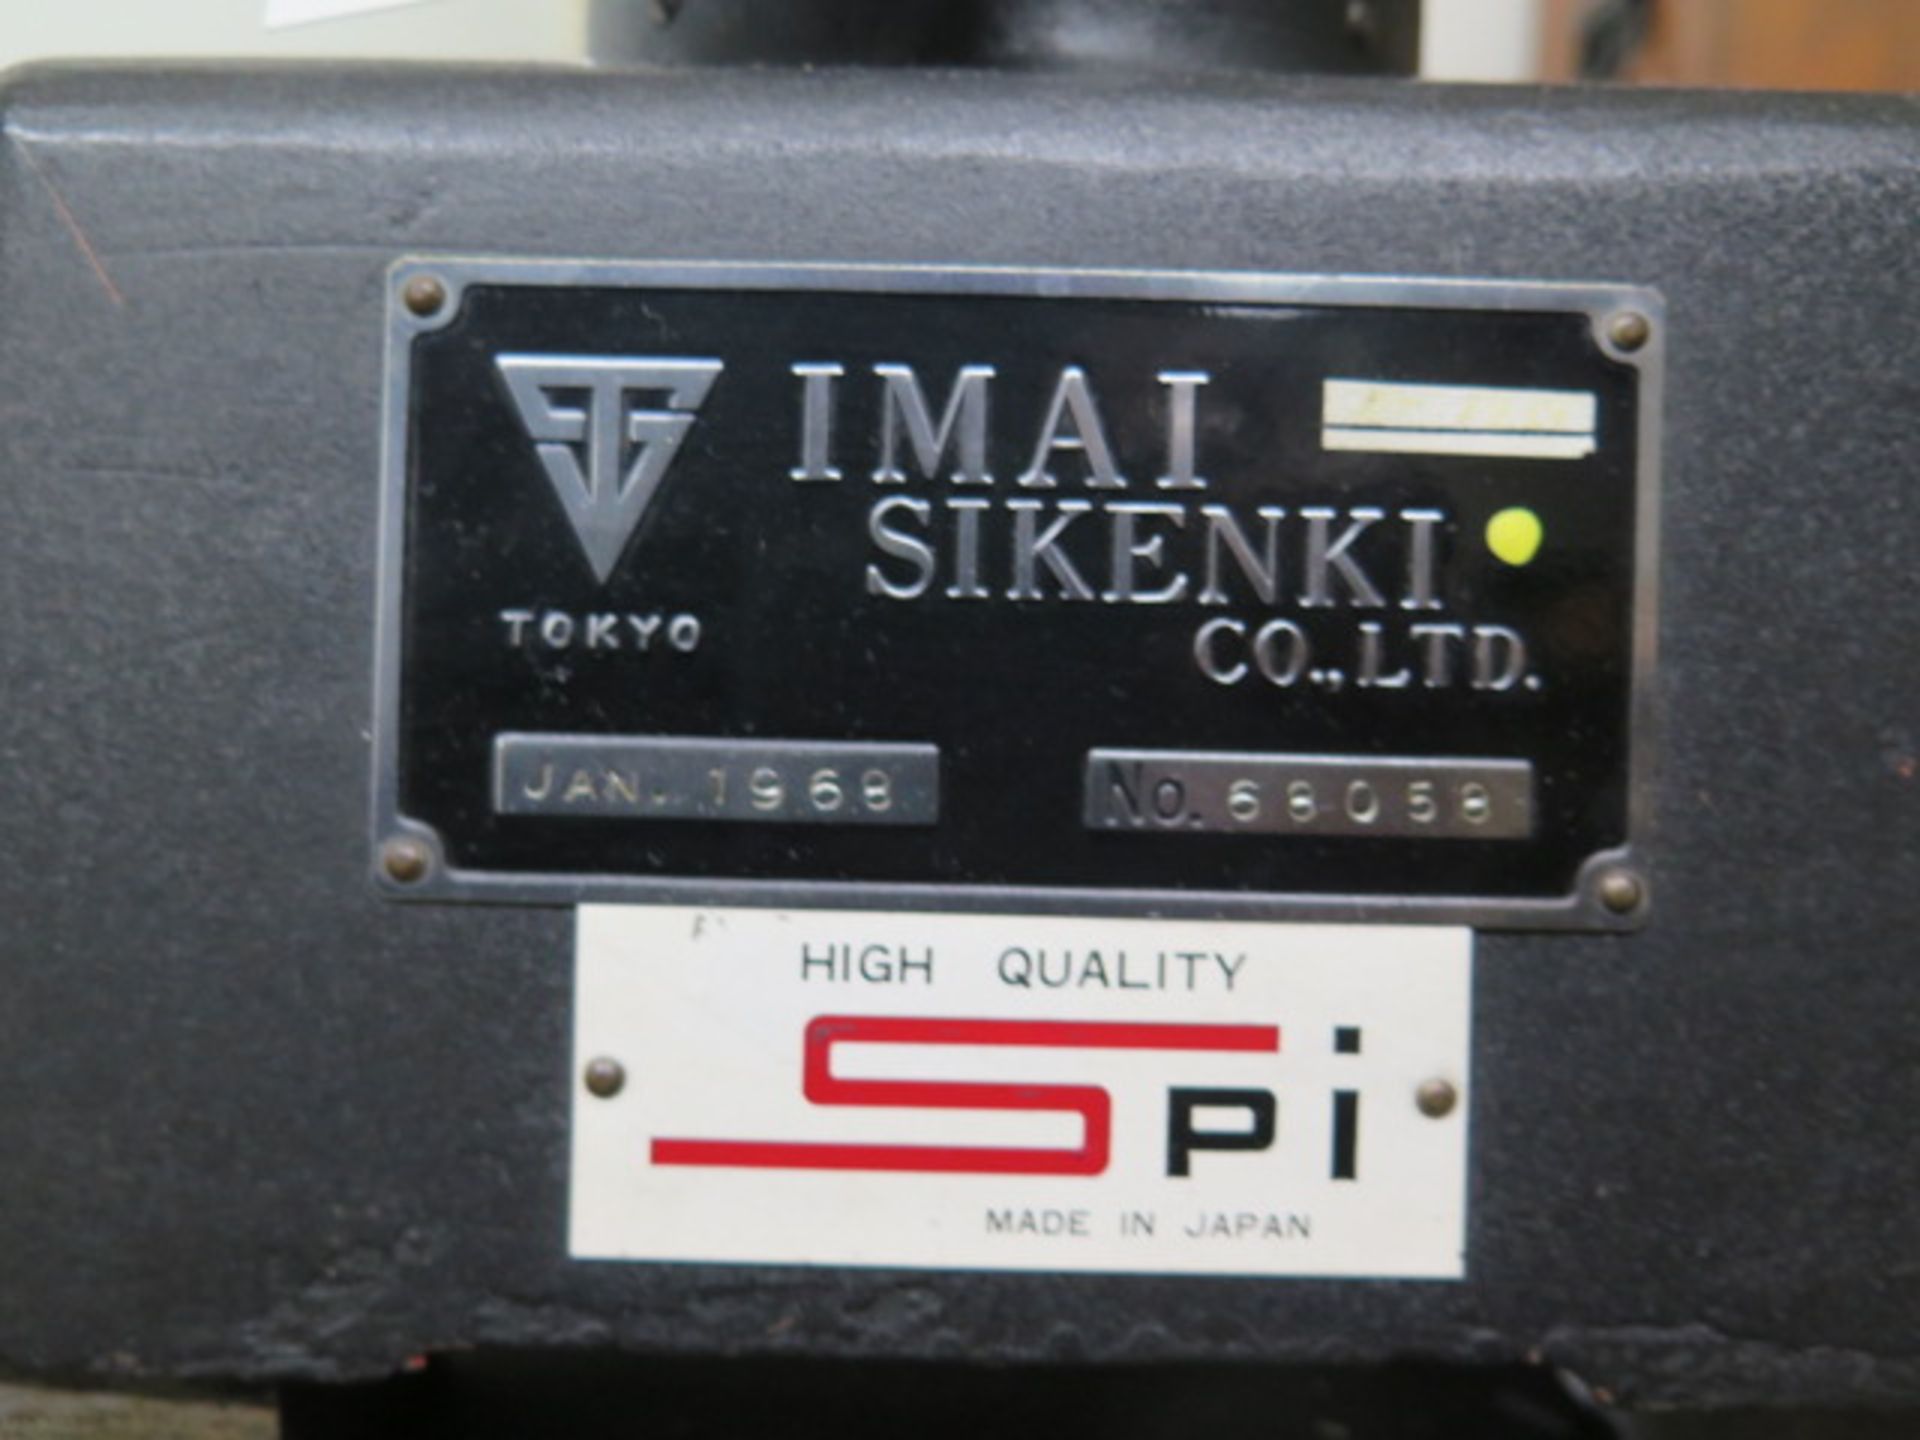 Imai Sekenki Rockwell Hardness Tester w/ Acces (SOLD AS-IS - NO WARRANTY) - Image 8 of 8